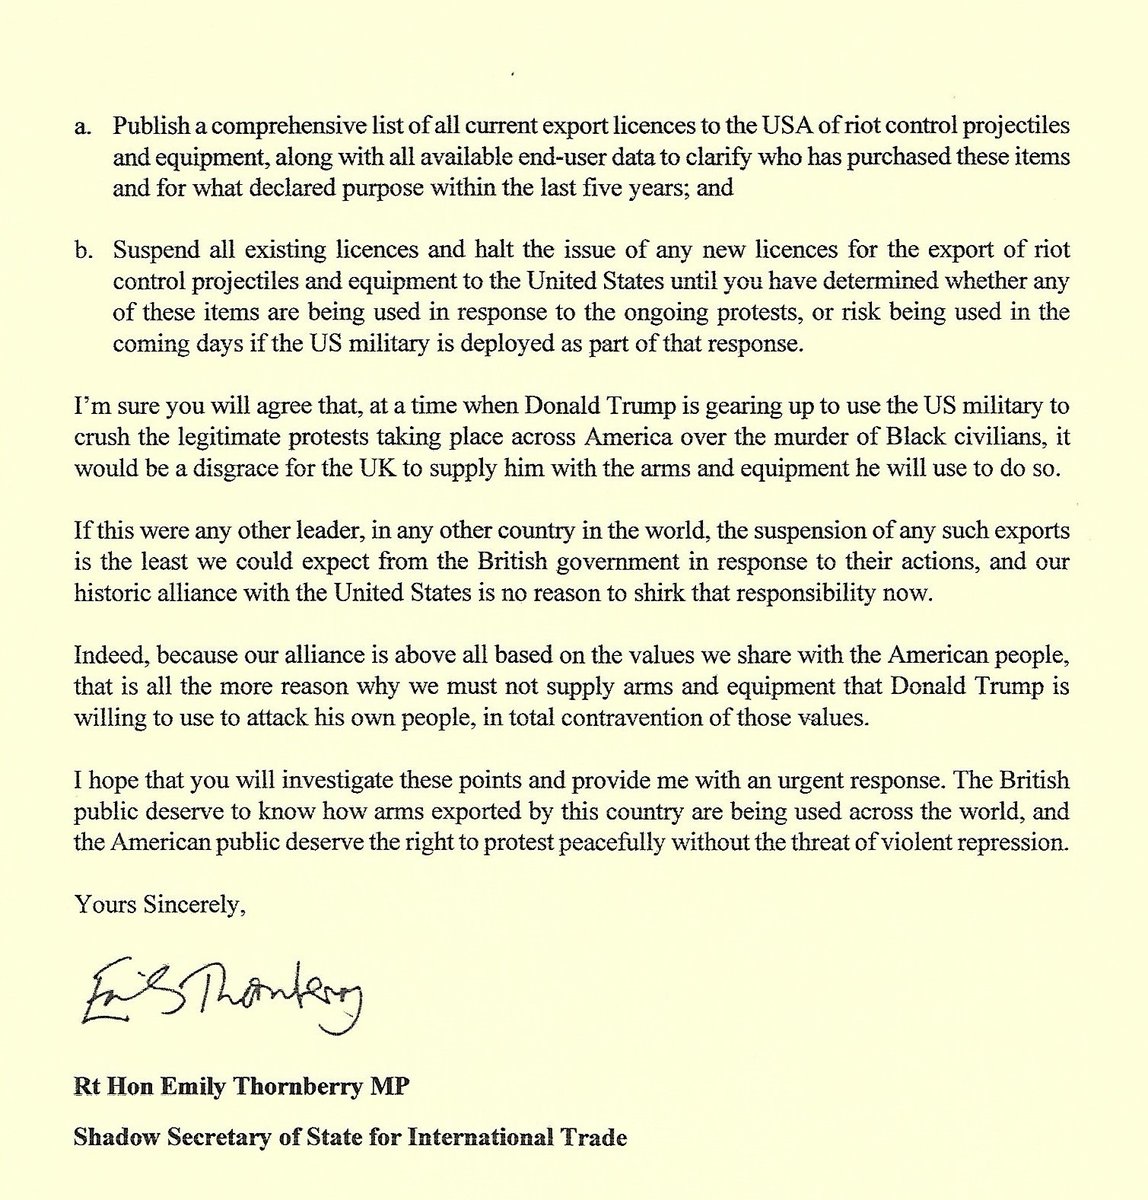 If British-made riot control equipment is being used to attack unarmed protesters and journalists in the US, those exports must immediately be stopped. We cannot be a party to the violence of the American President against his own people. My full letter to Liz Truss is attached.